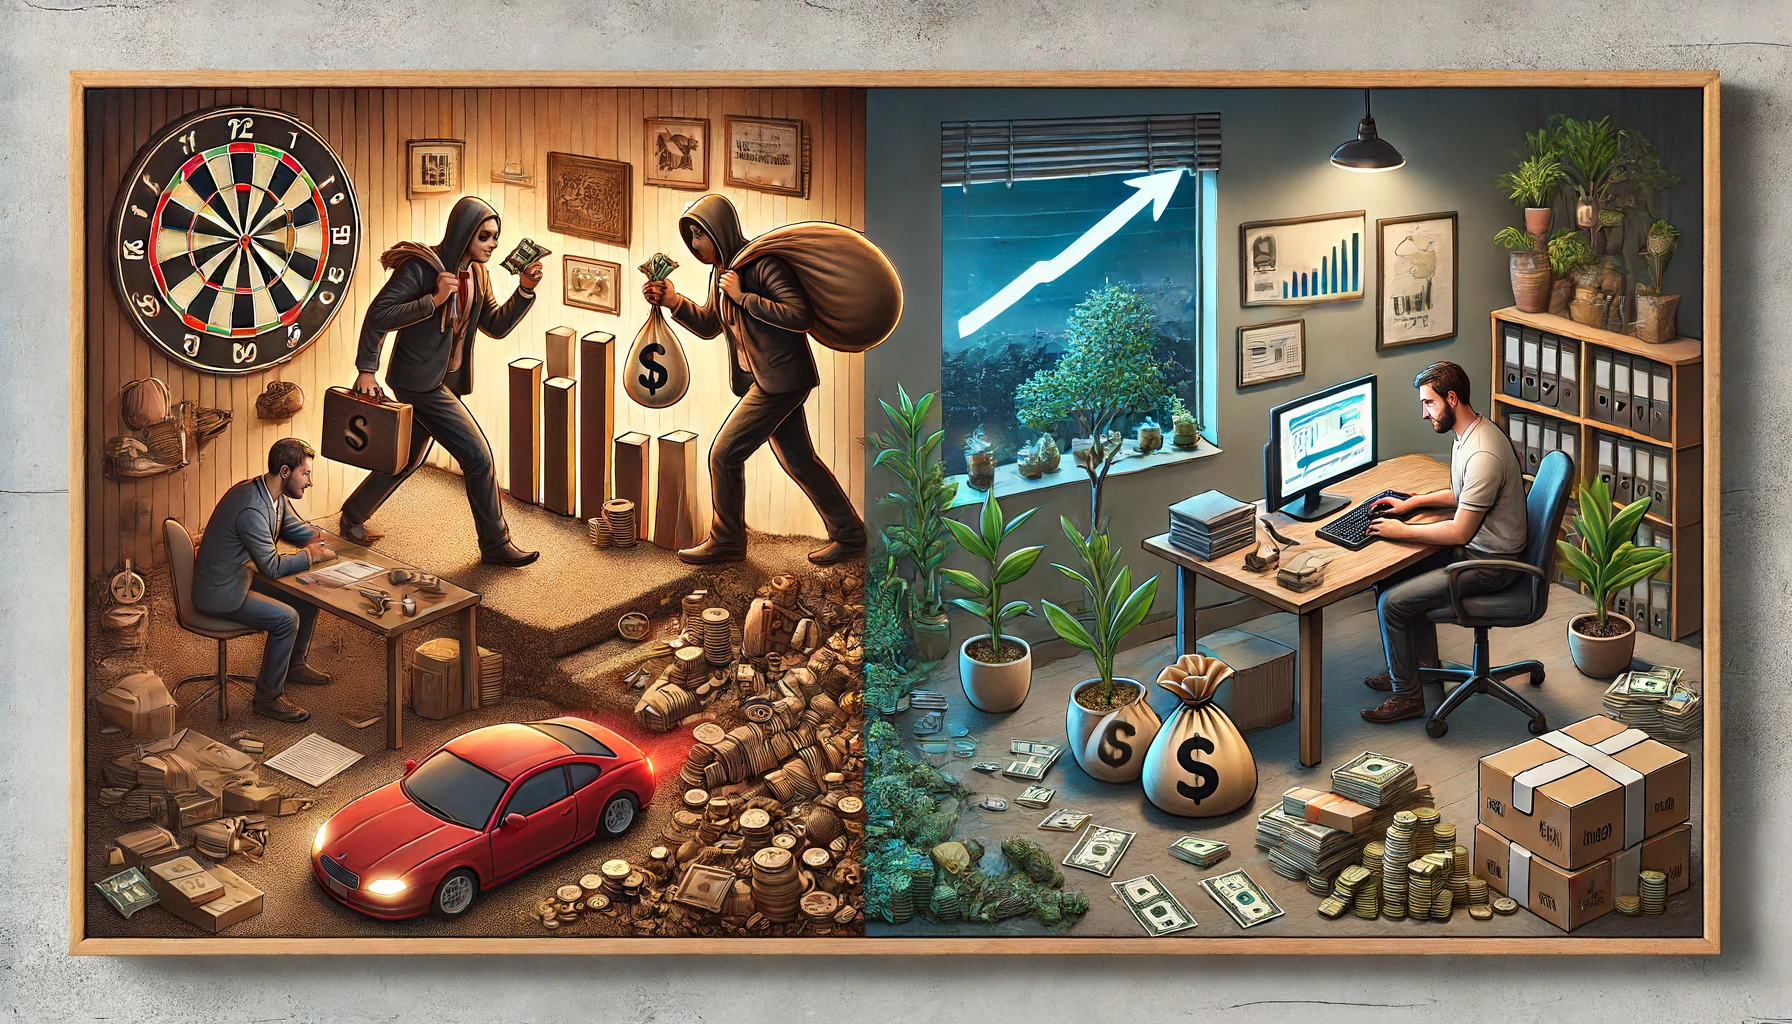 A photo-realistic horizontal illustration showing two contrasting scenes. Crime for wealth vs. hard work for wealth.